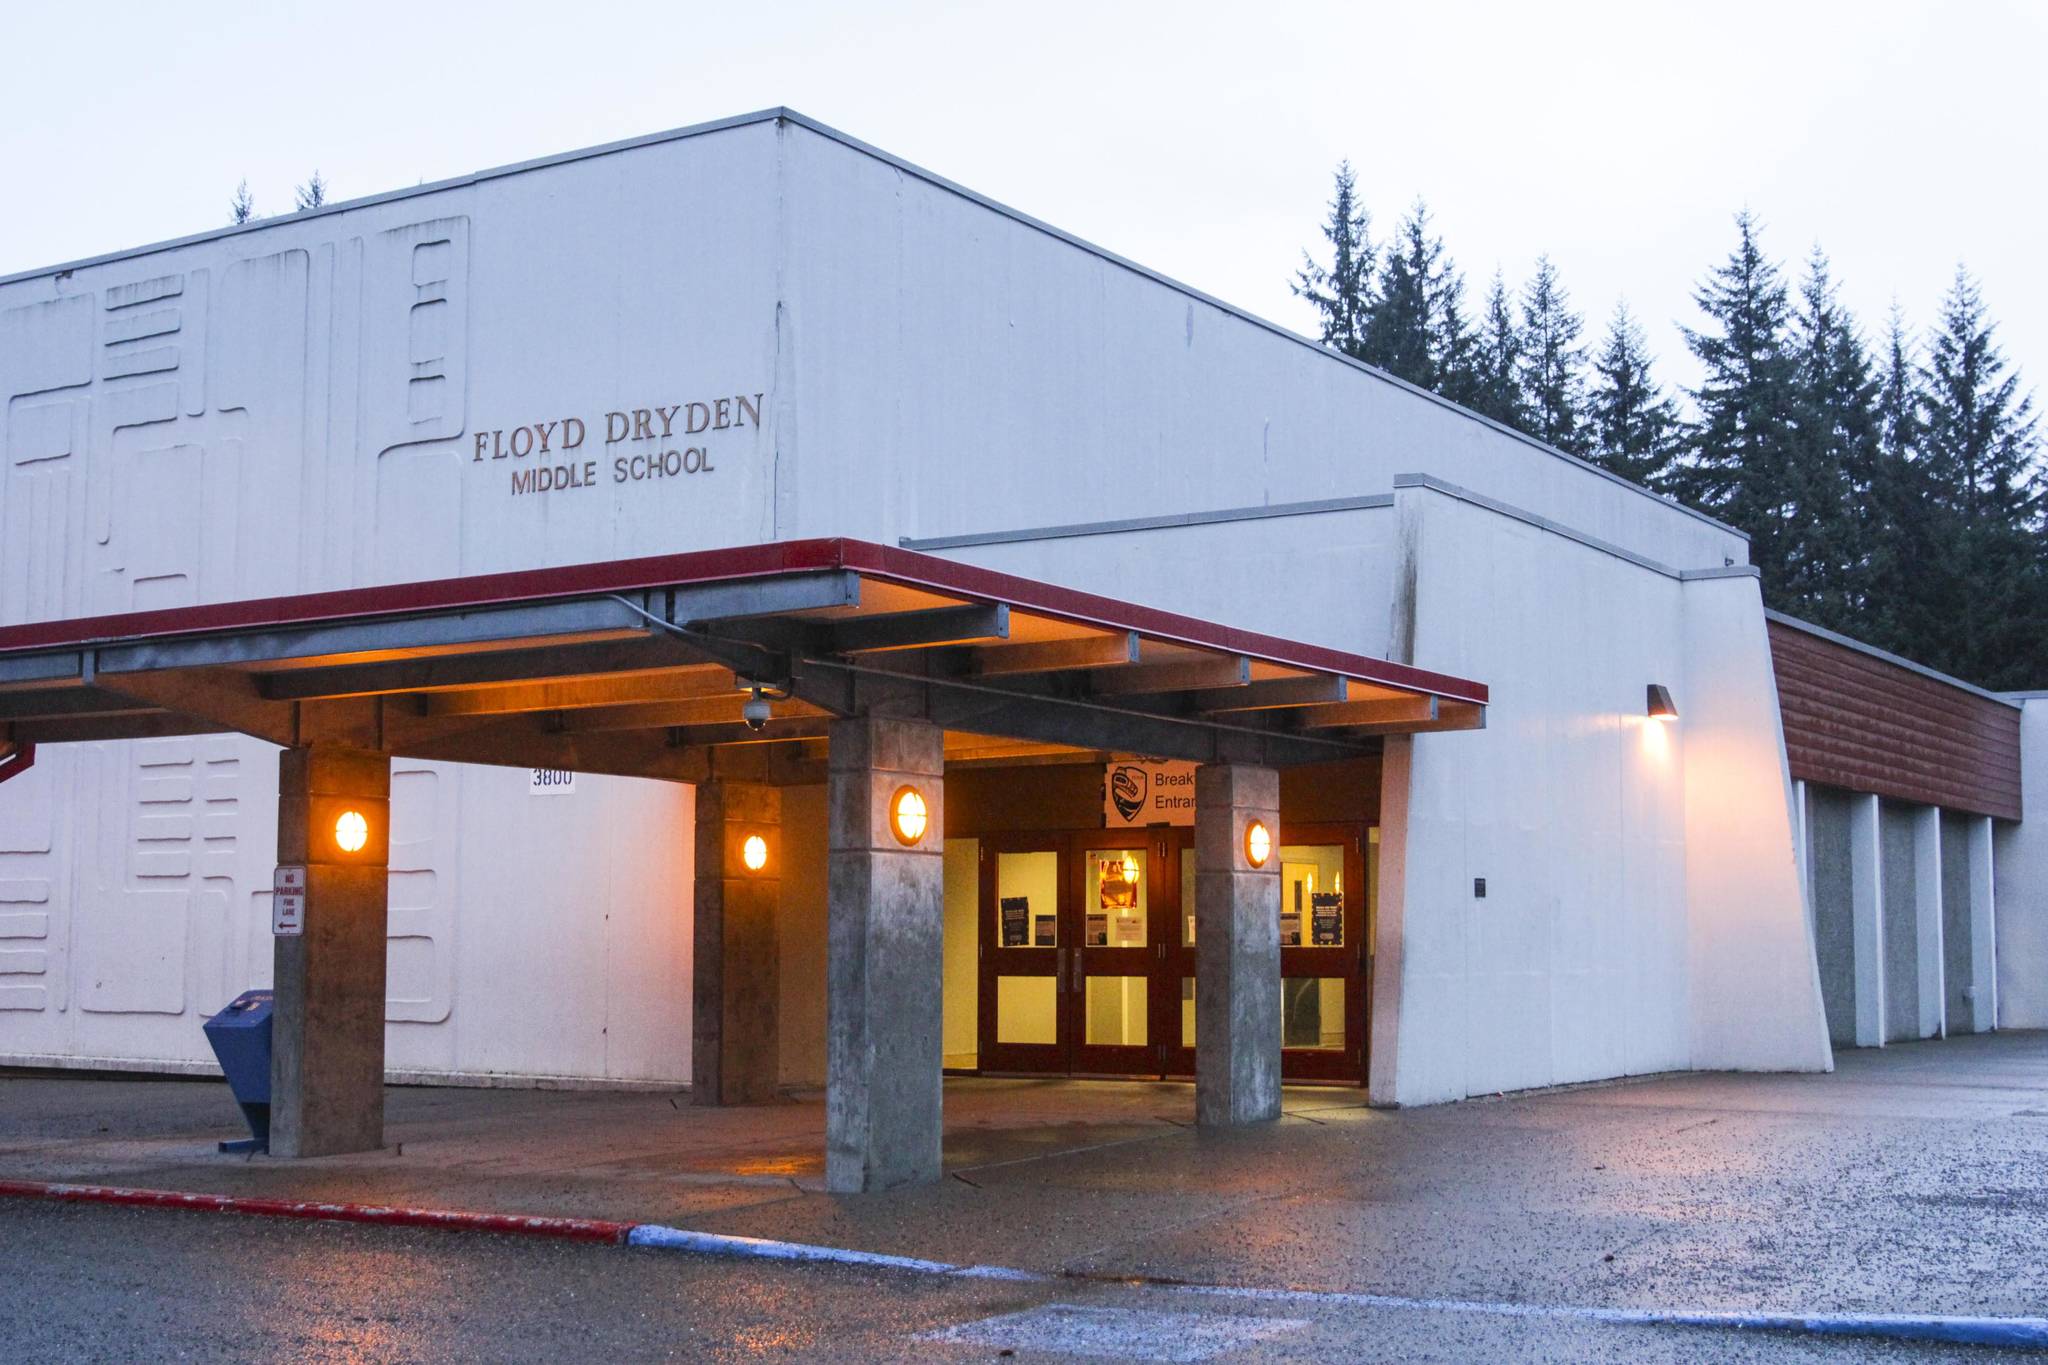 Students reentered school Monday morning with distancing strategies and mitigation protocols in place at Floyd Dryden Middle School, Jan. 11, 2021. (Michael S. Lockett / Juneau Empire)